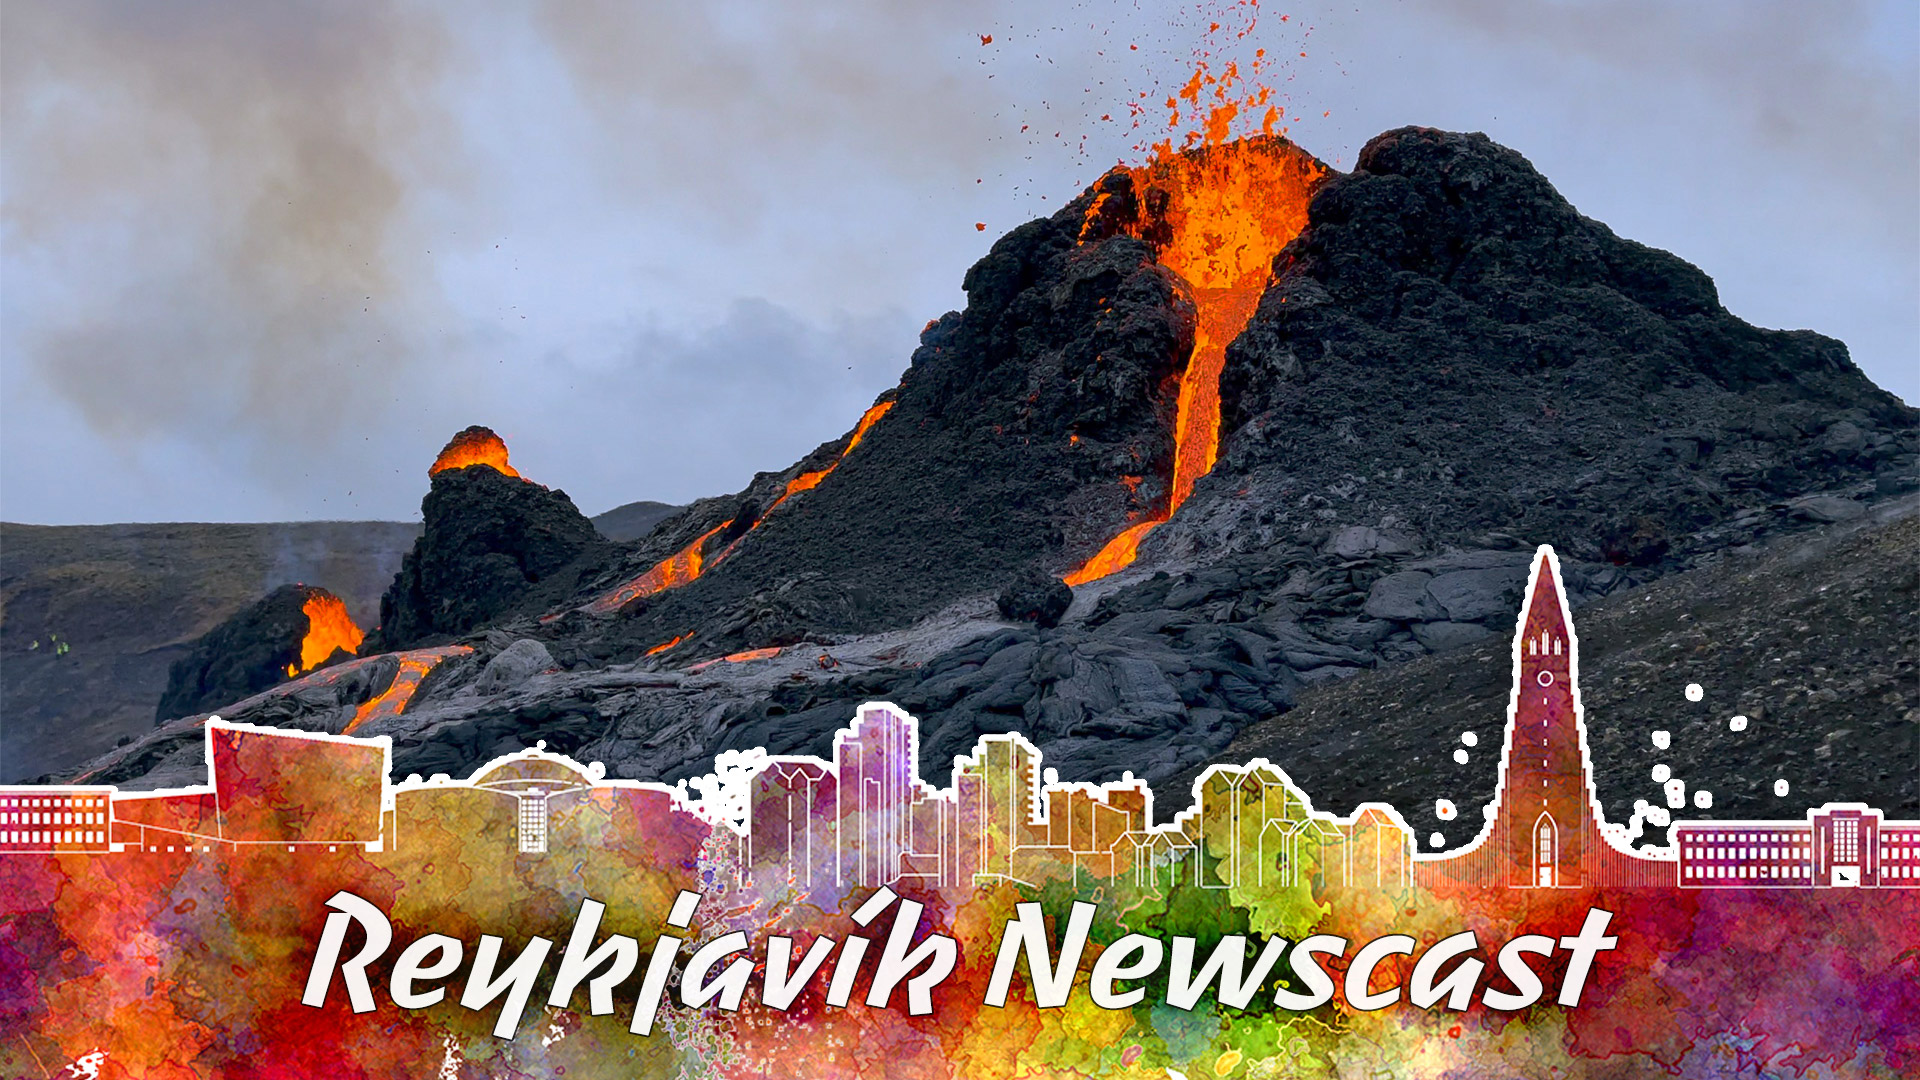 We visited the volcano in Iceland and it blew into our minds